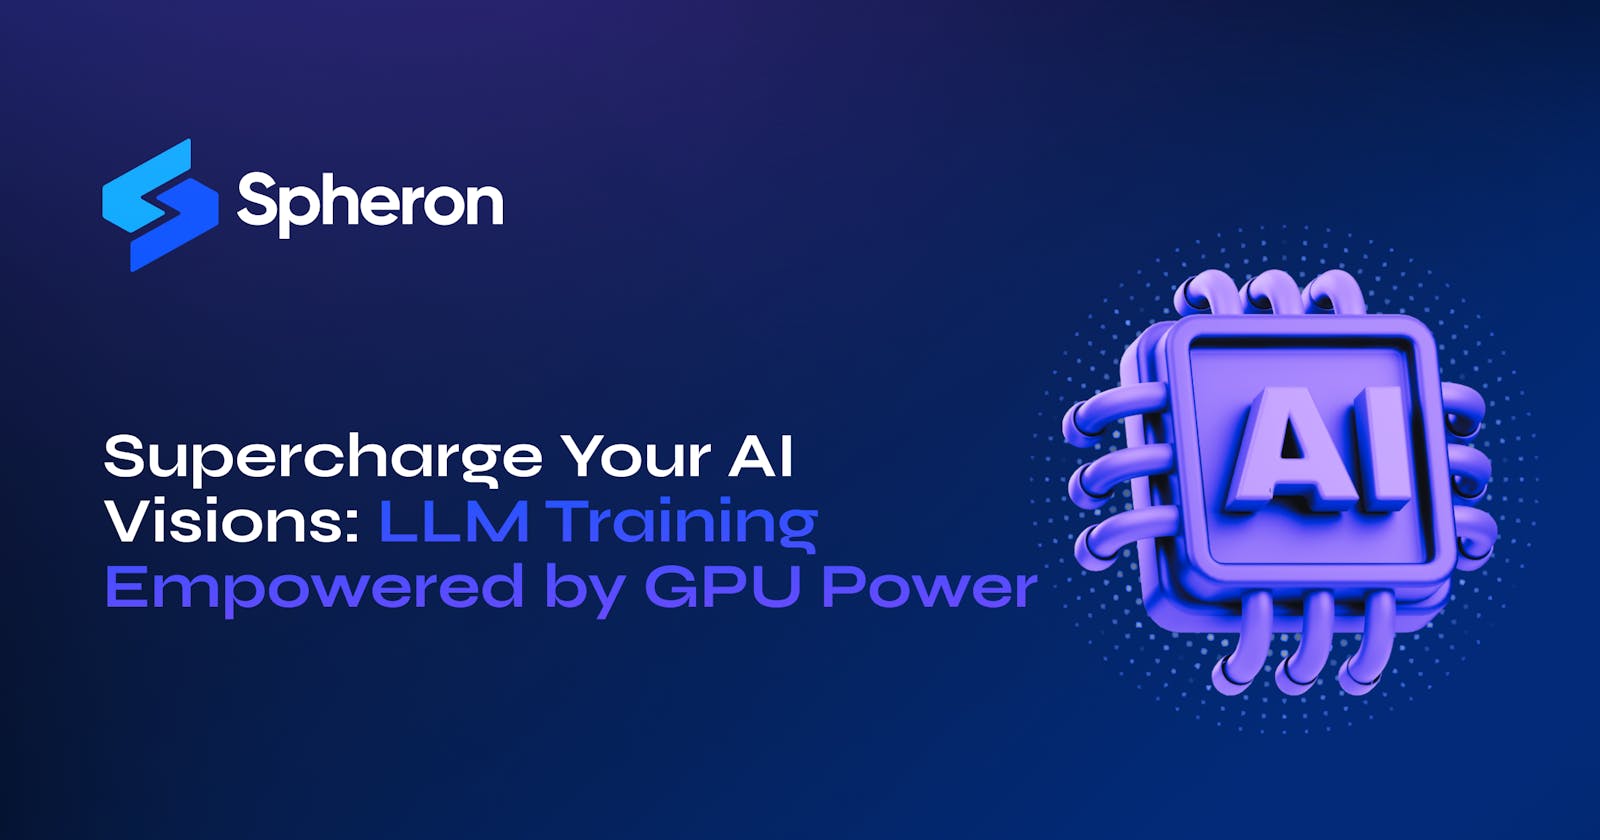 Supercharge Your AI Visions: LLM Training Empowered by GPU Power